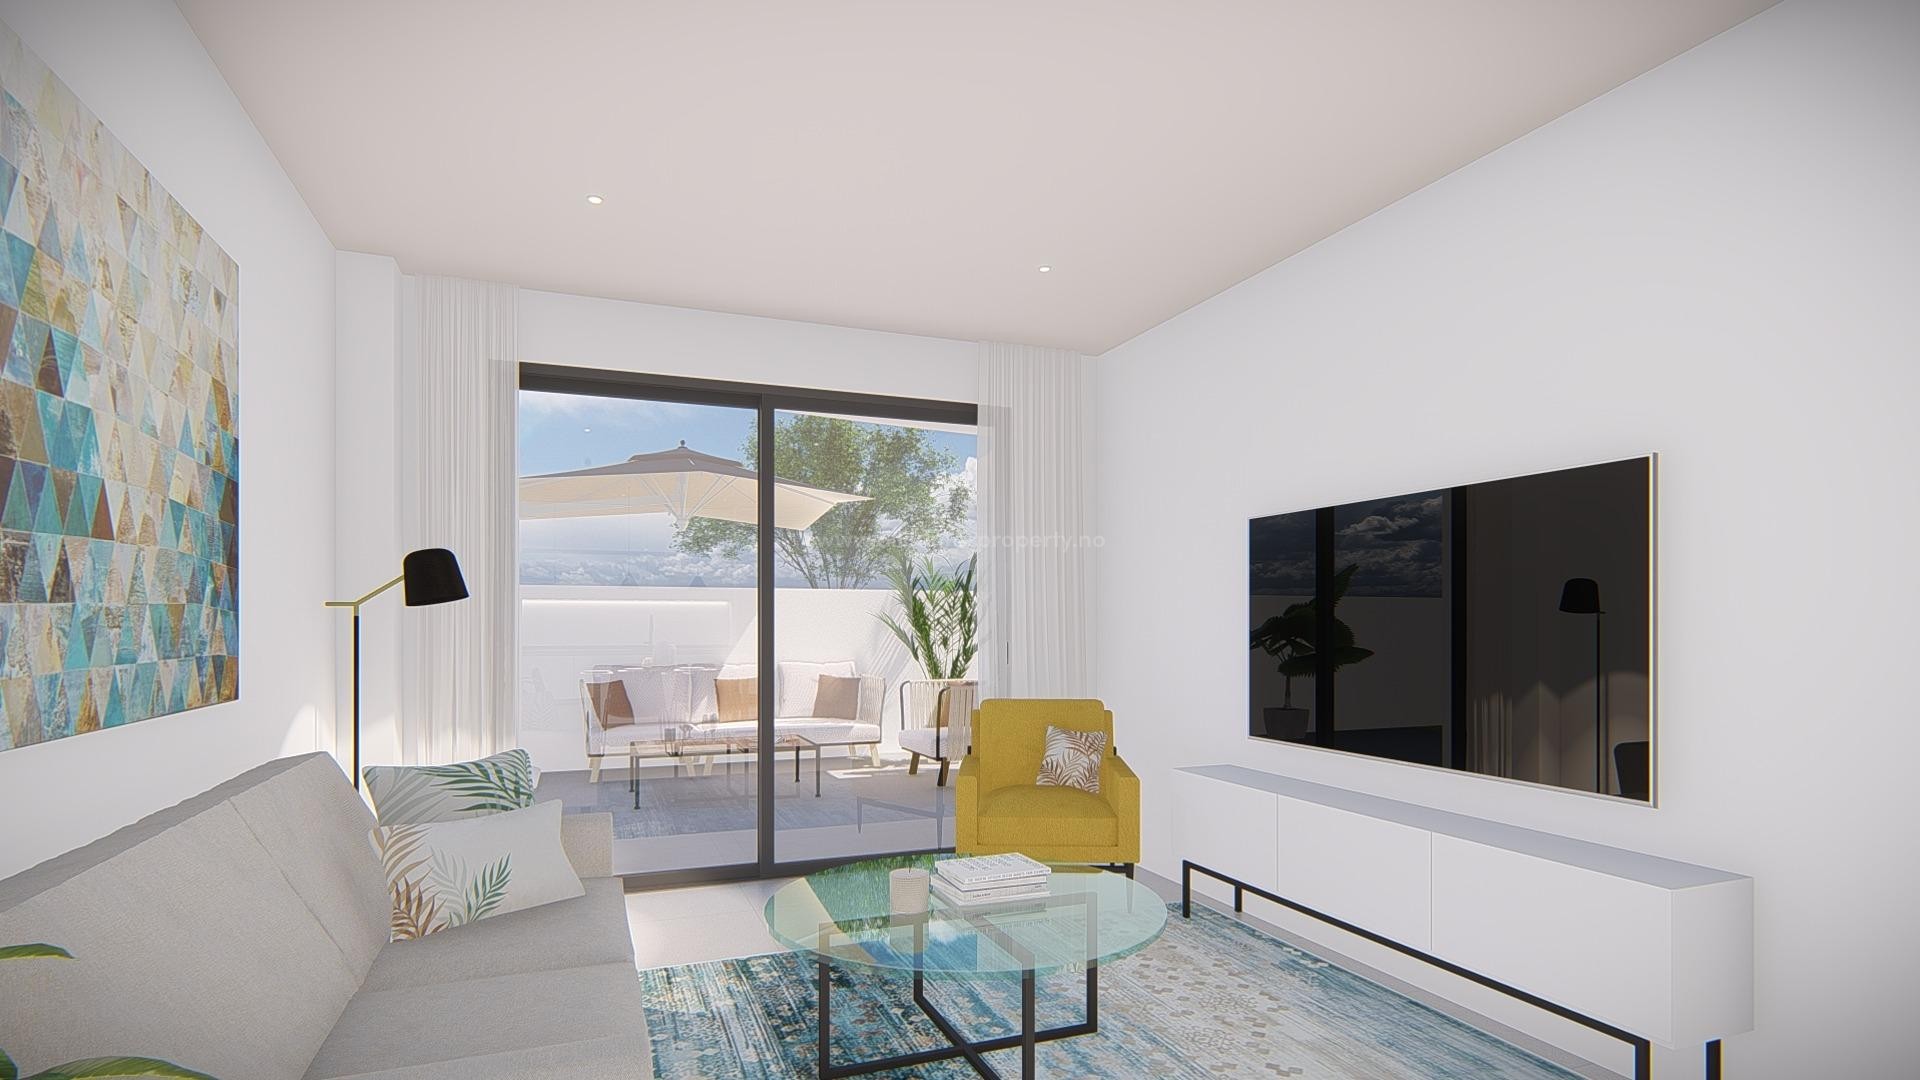 Residential complex in Villajoyosa with 32 apartments with 2 and 3 bedrooms, terrace, garden or solarium, communal pool, private garage and 5 minutes from the beach